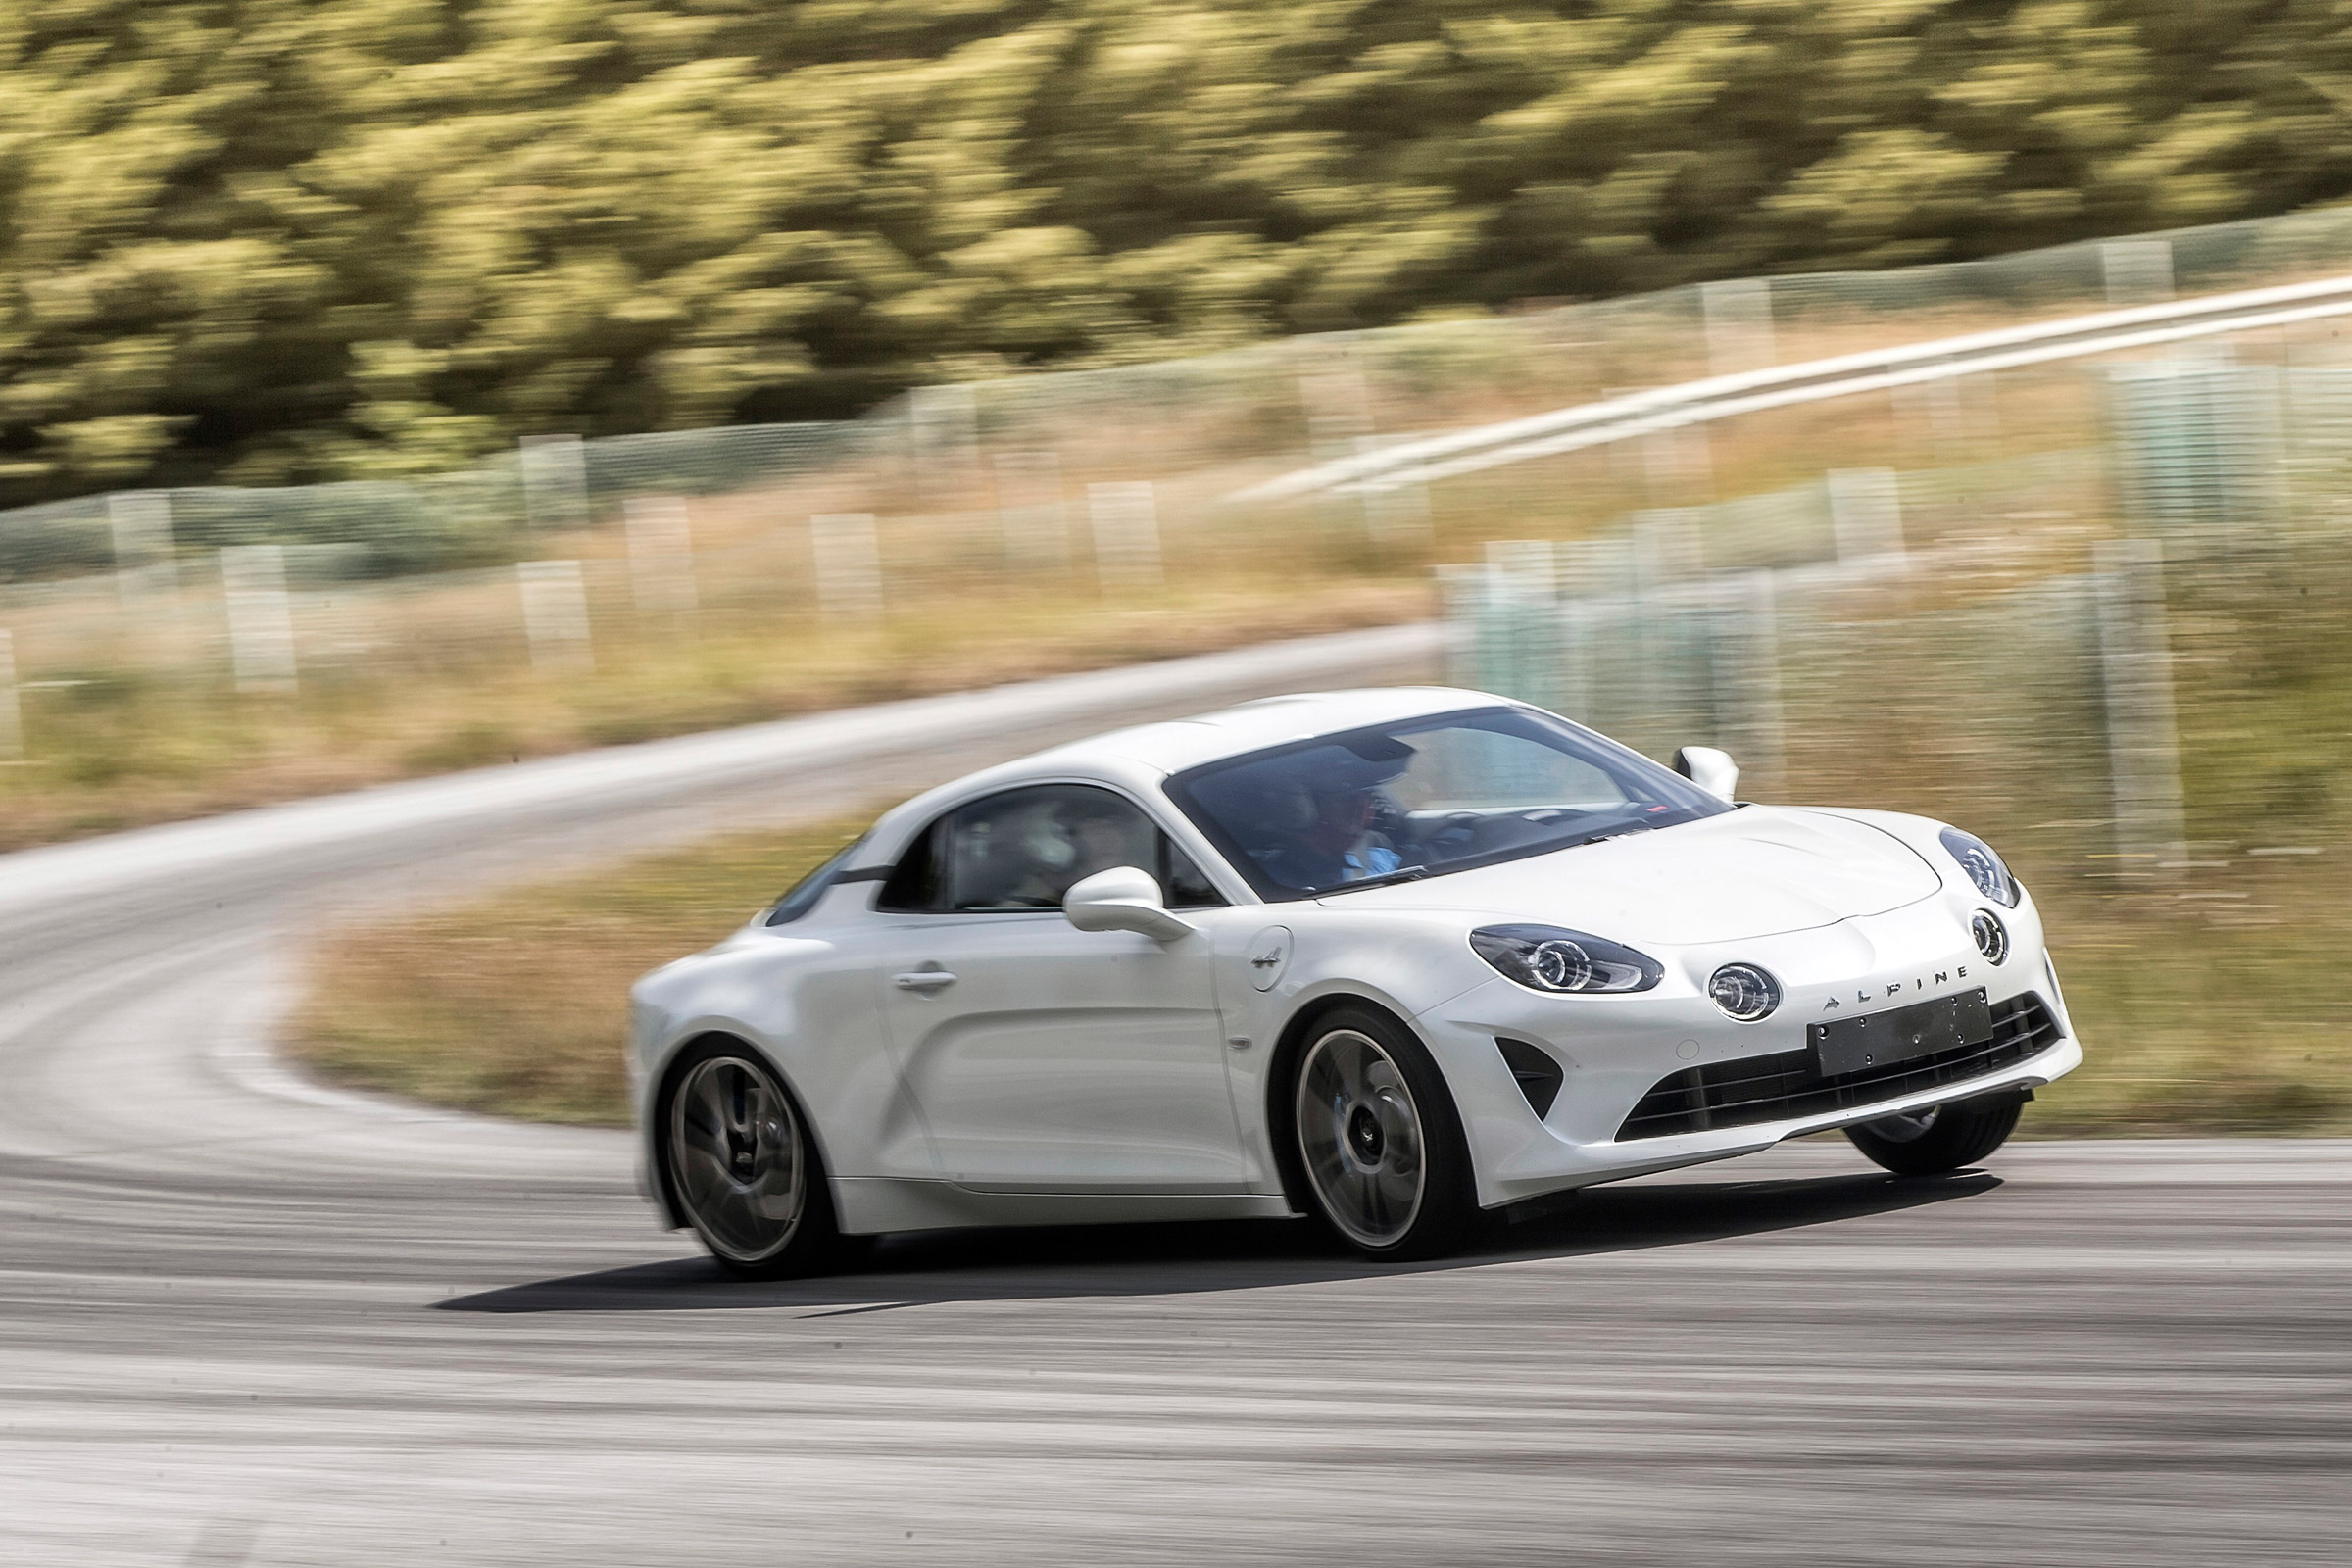 New Alpine A110: first passenger ride review, specs and latest news | evo